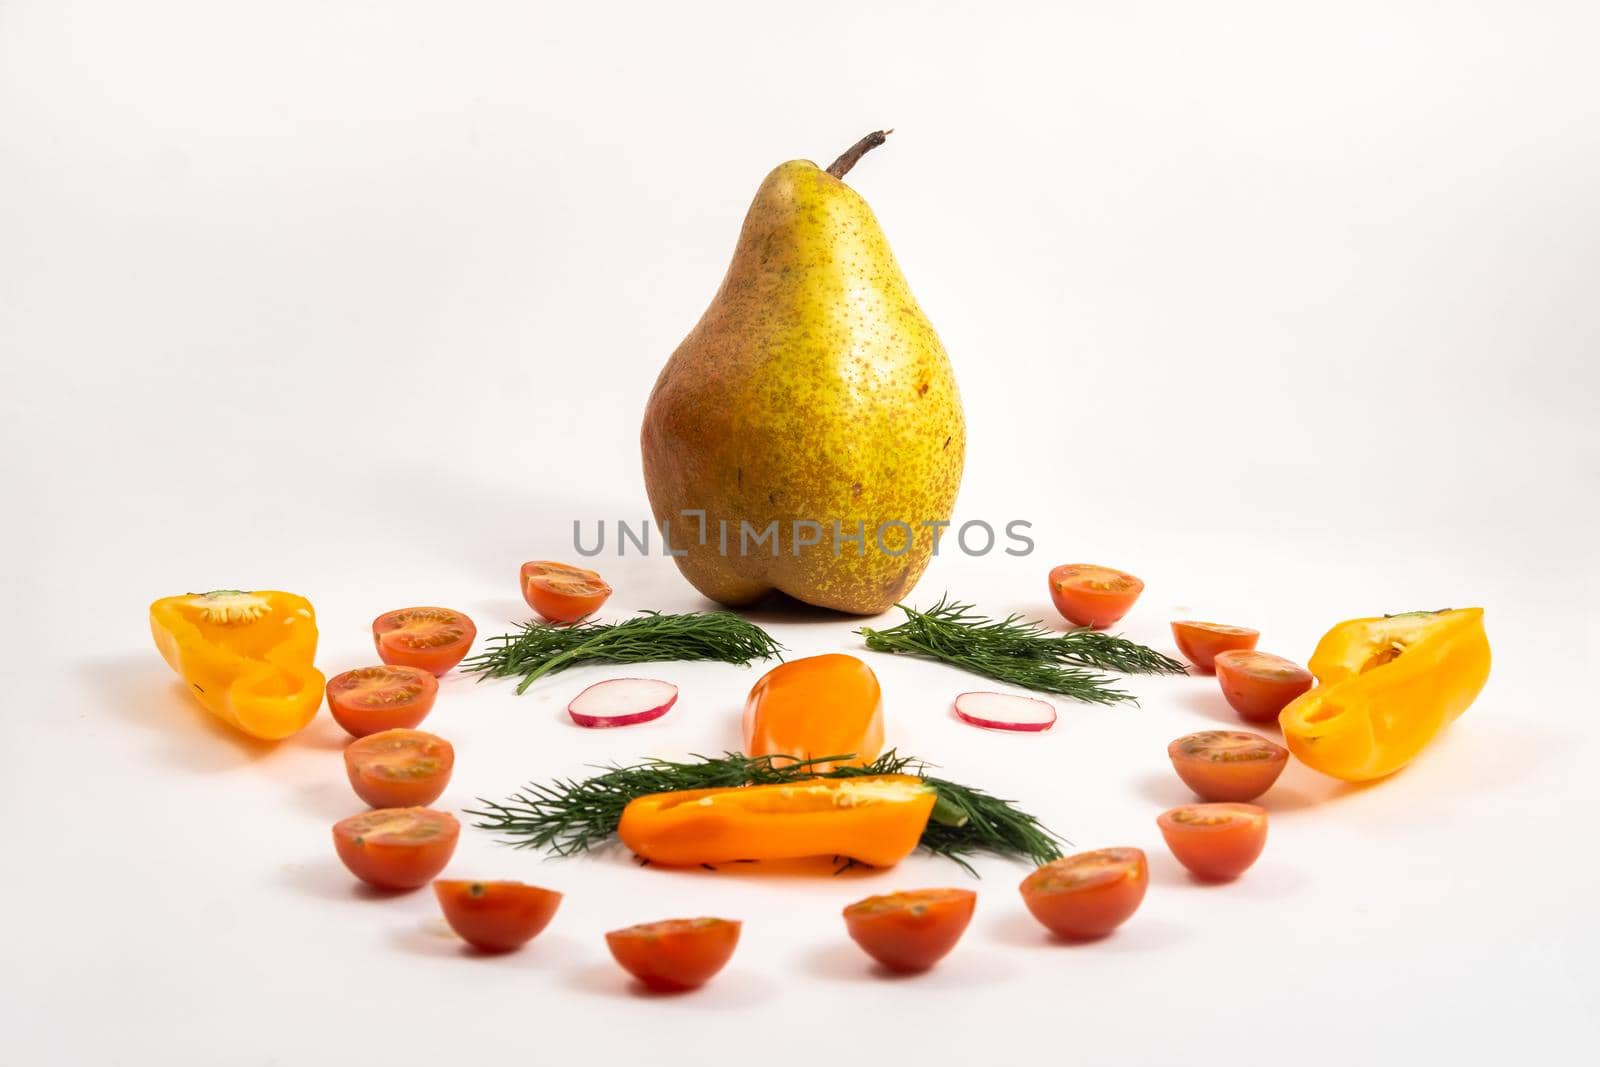 The face of a man made of sliced vegetables and a pear on his head on a white background.